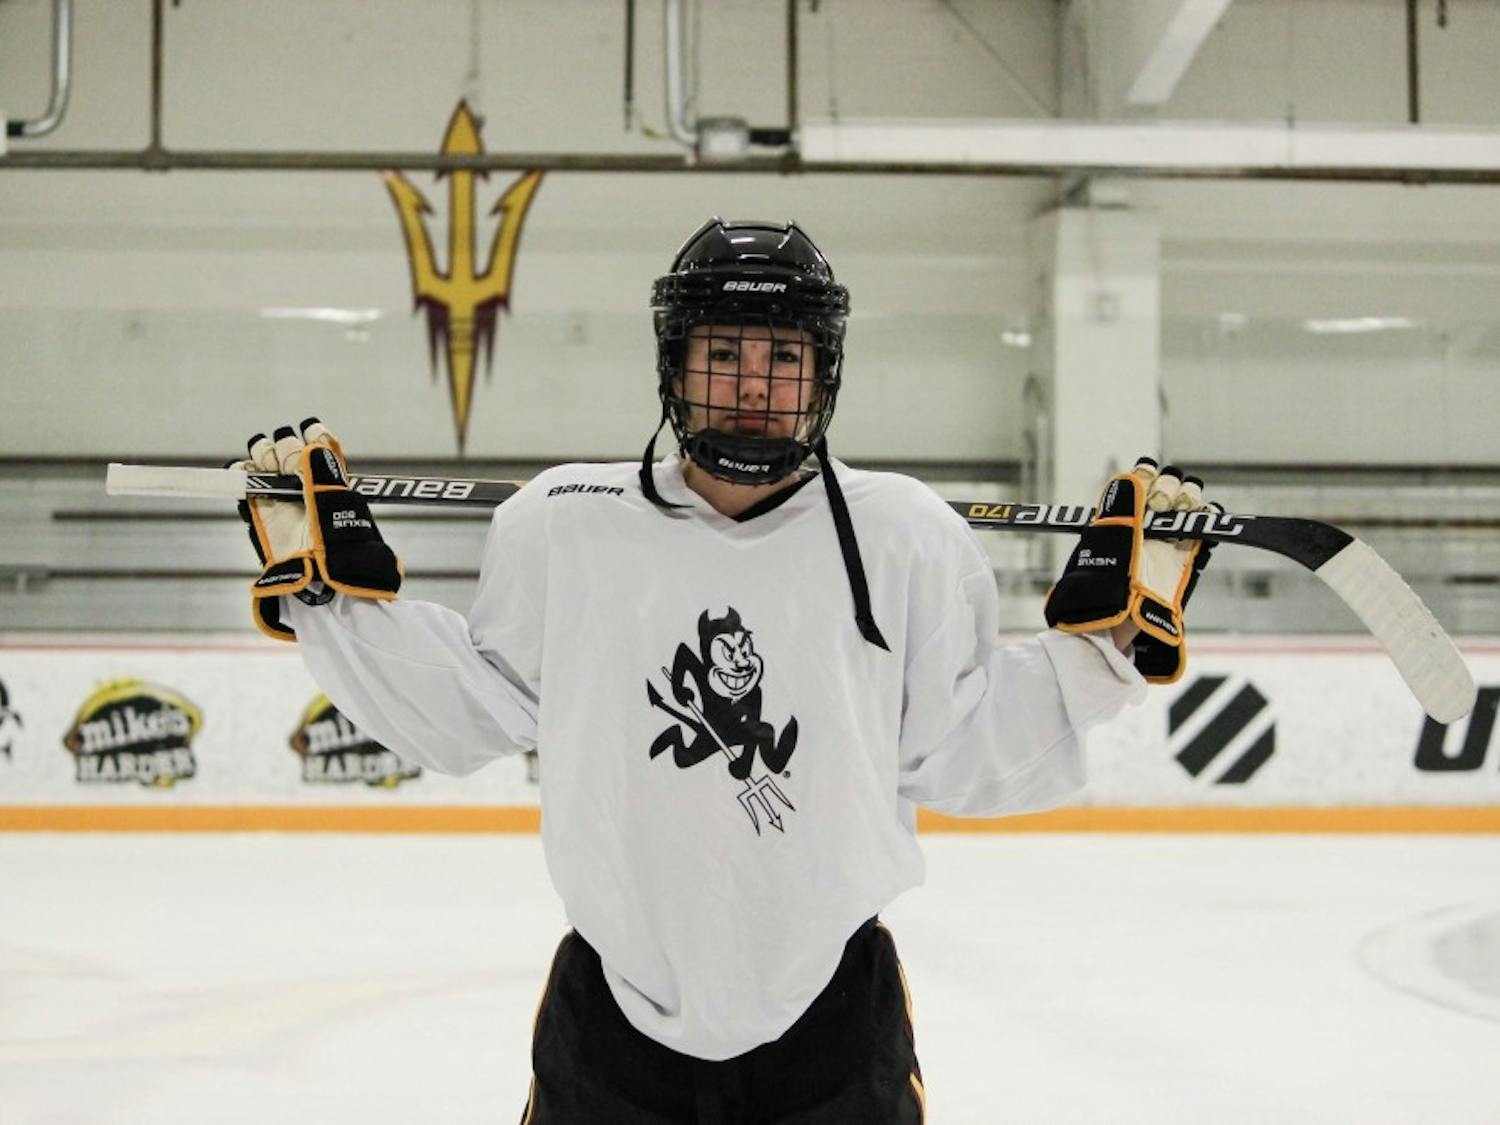 ASU women's hockey sophomore defenseman Brooke Kelsall poses for a picture after practice at Oceanside Ice Arena in Tempe on Tuesday, Sept. 13. 